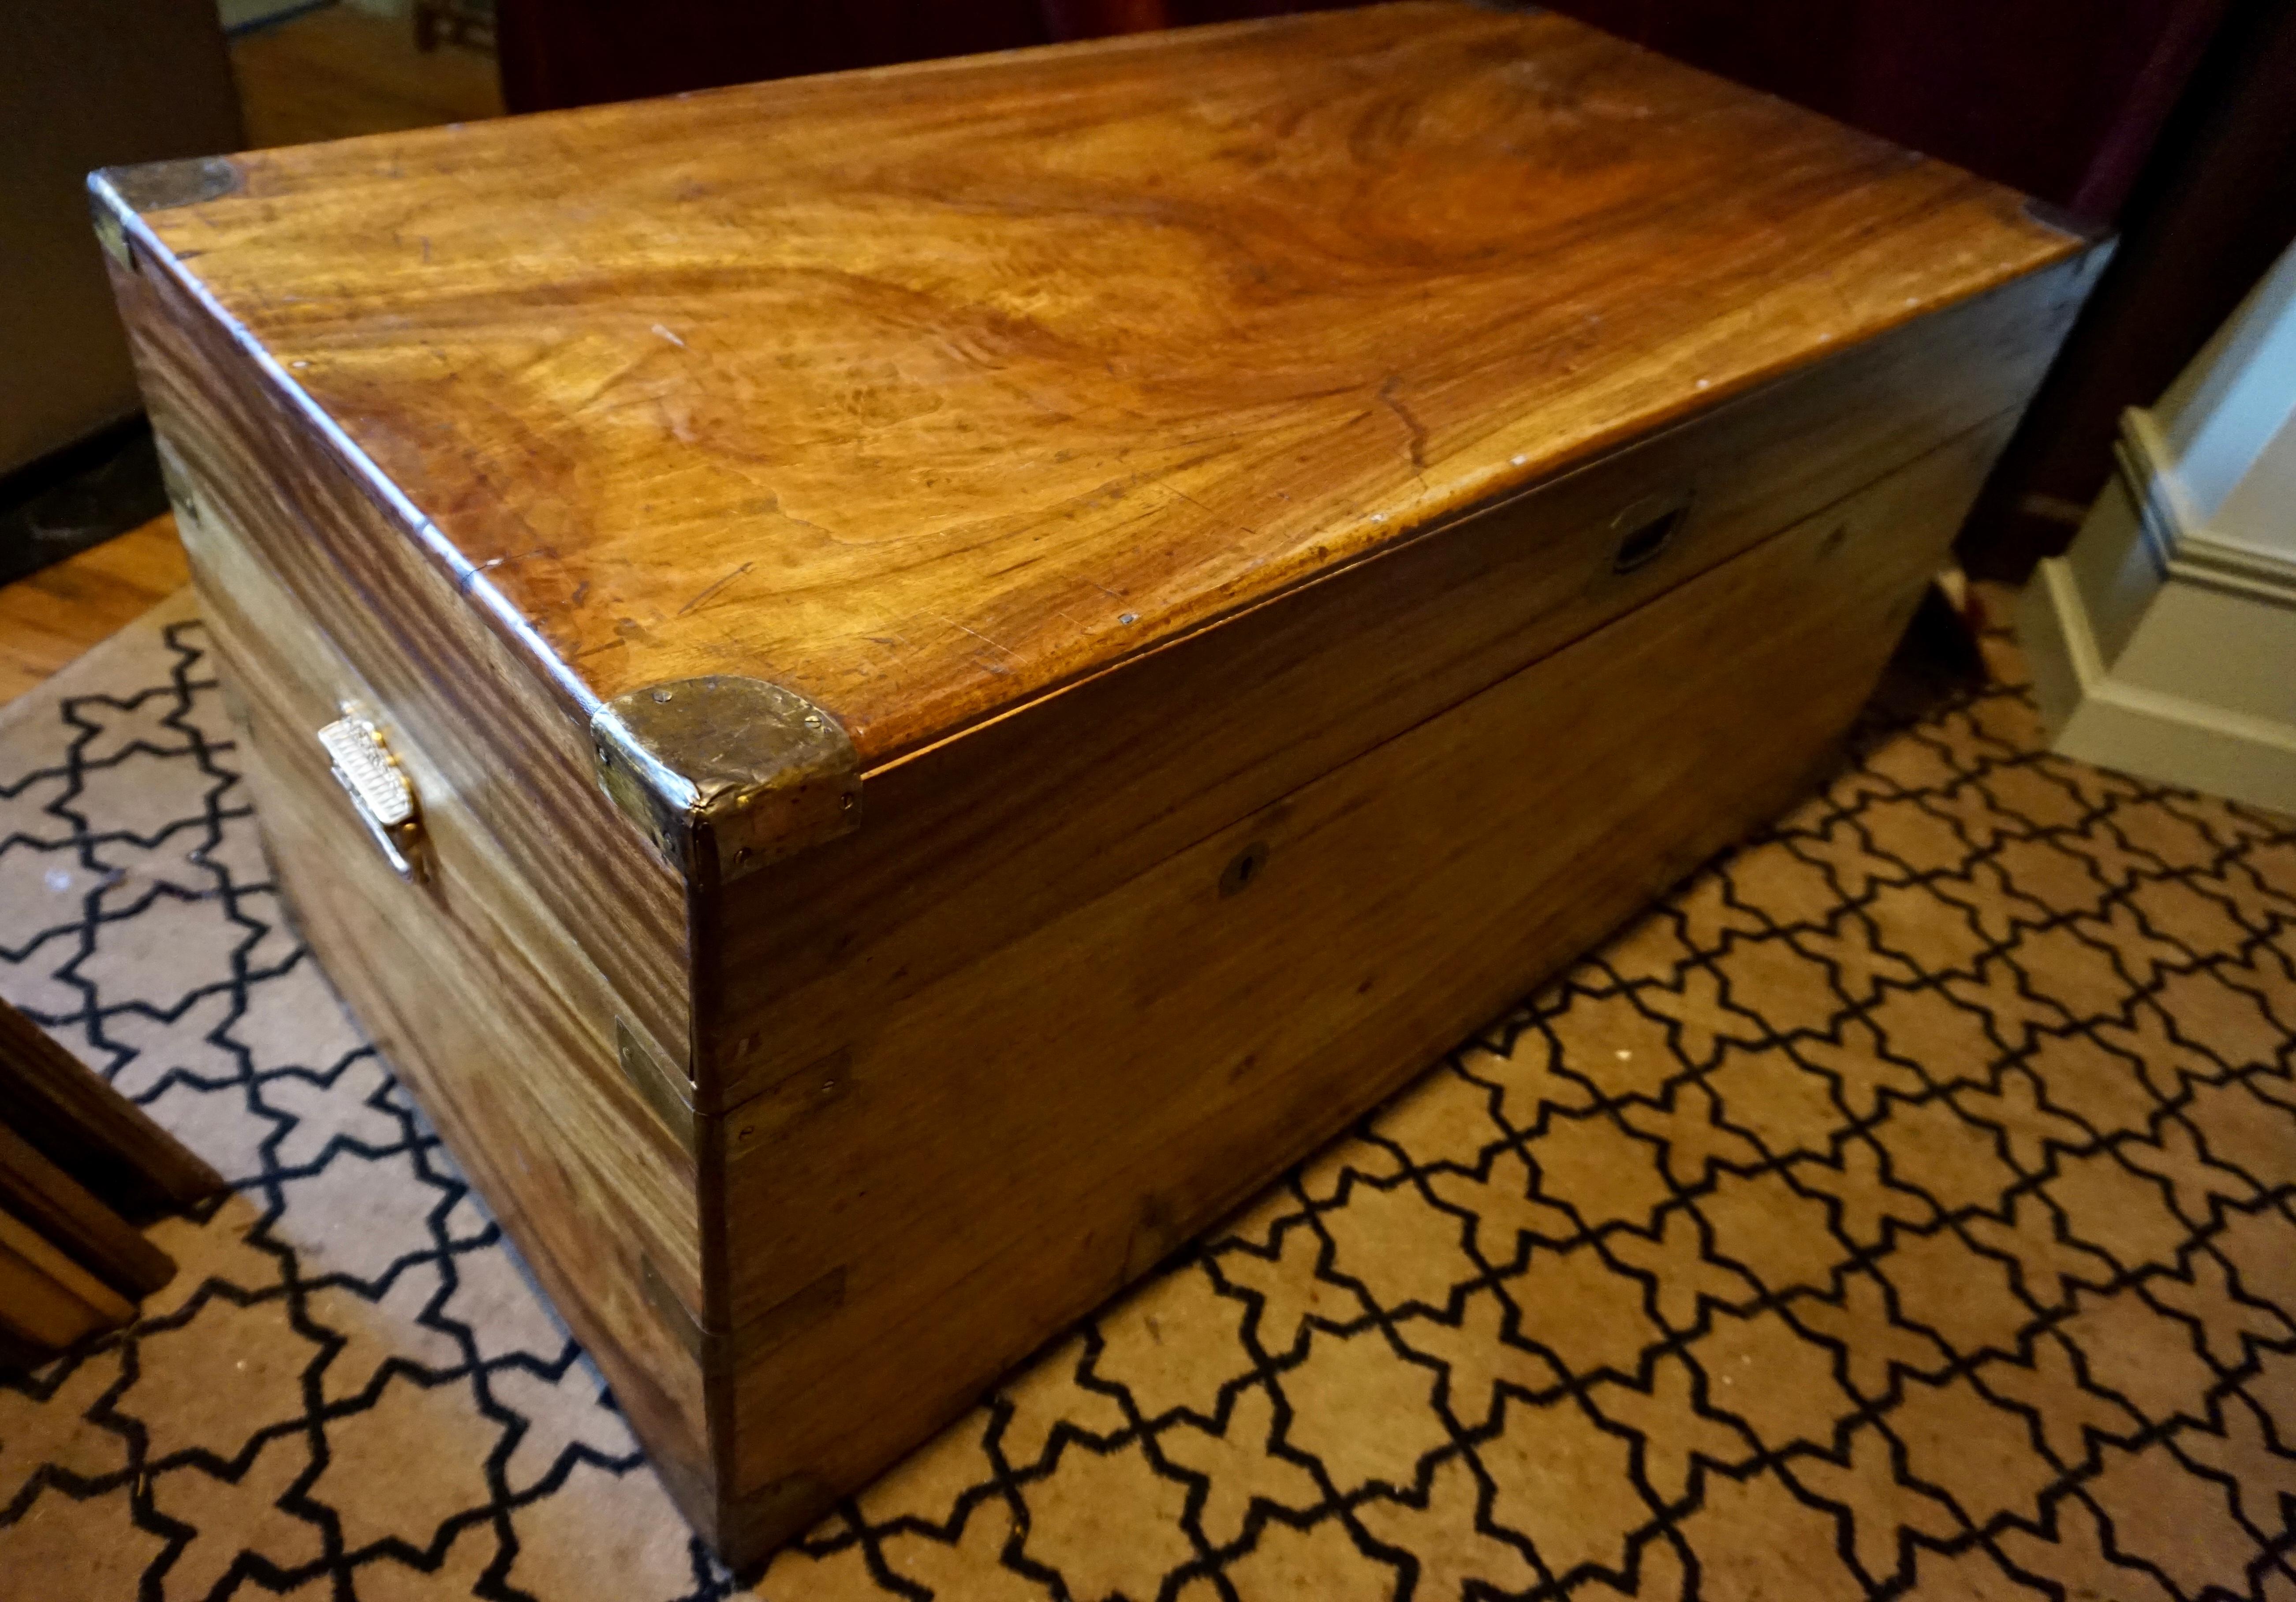 Beautiful honey patina imported Camphor wood British Colonial handmade chest that was supposedly custom made for an officer. Brass work in good order. Single piece of Camphor wood on each end indicates old growth timber. British lever lock hardware